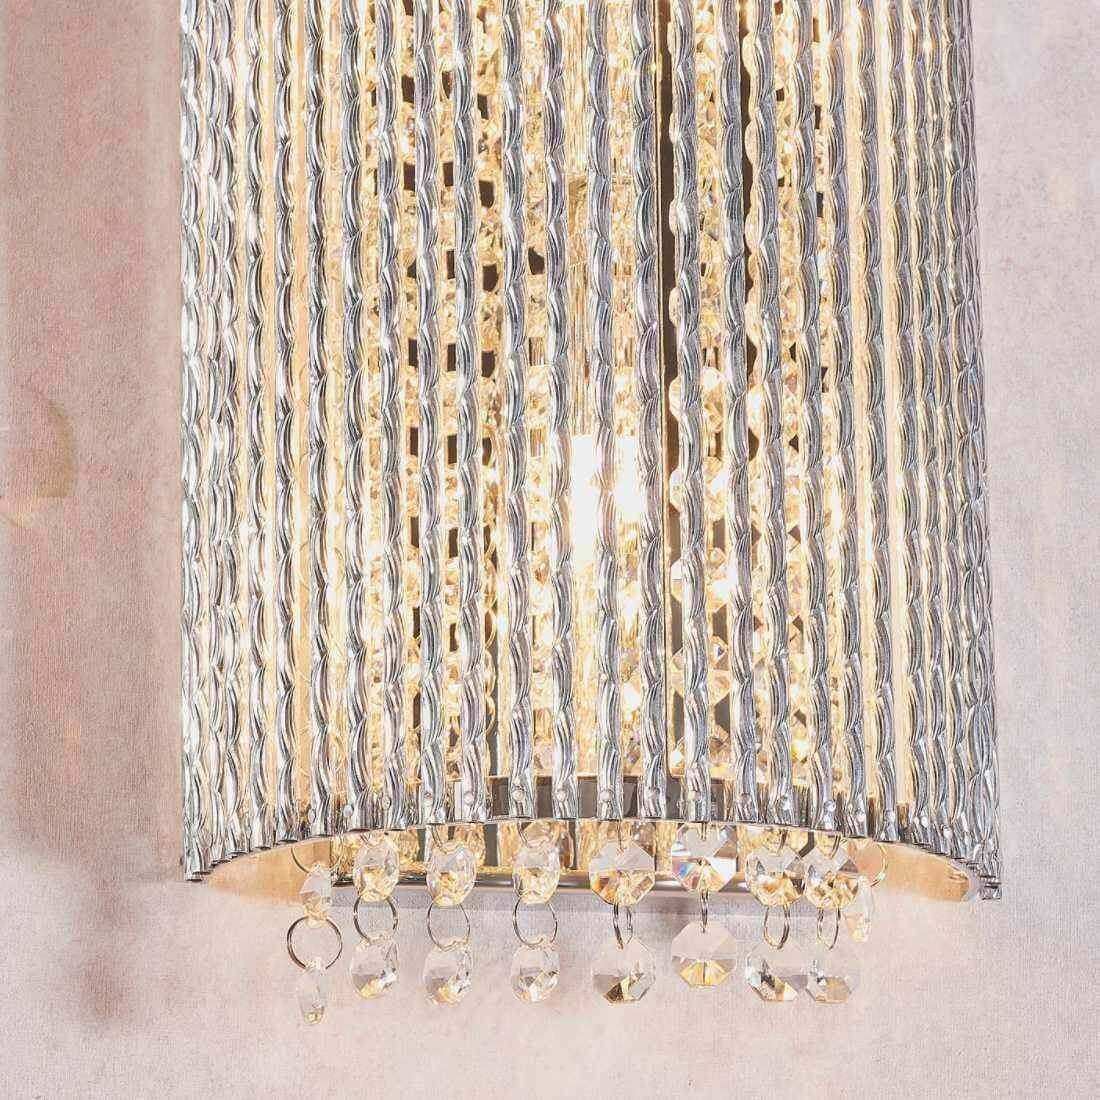 Opulent Wall Light - The Farthing